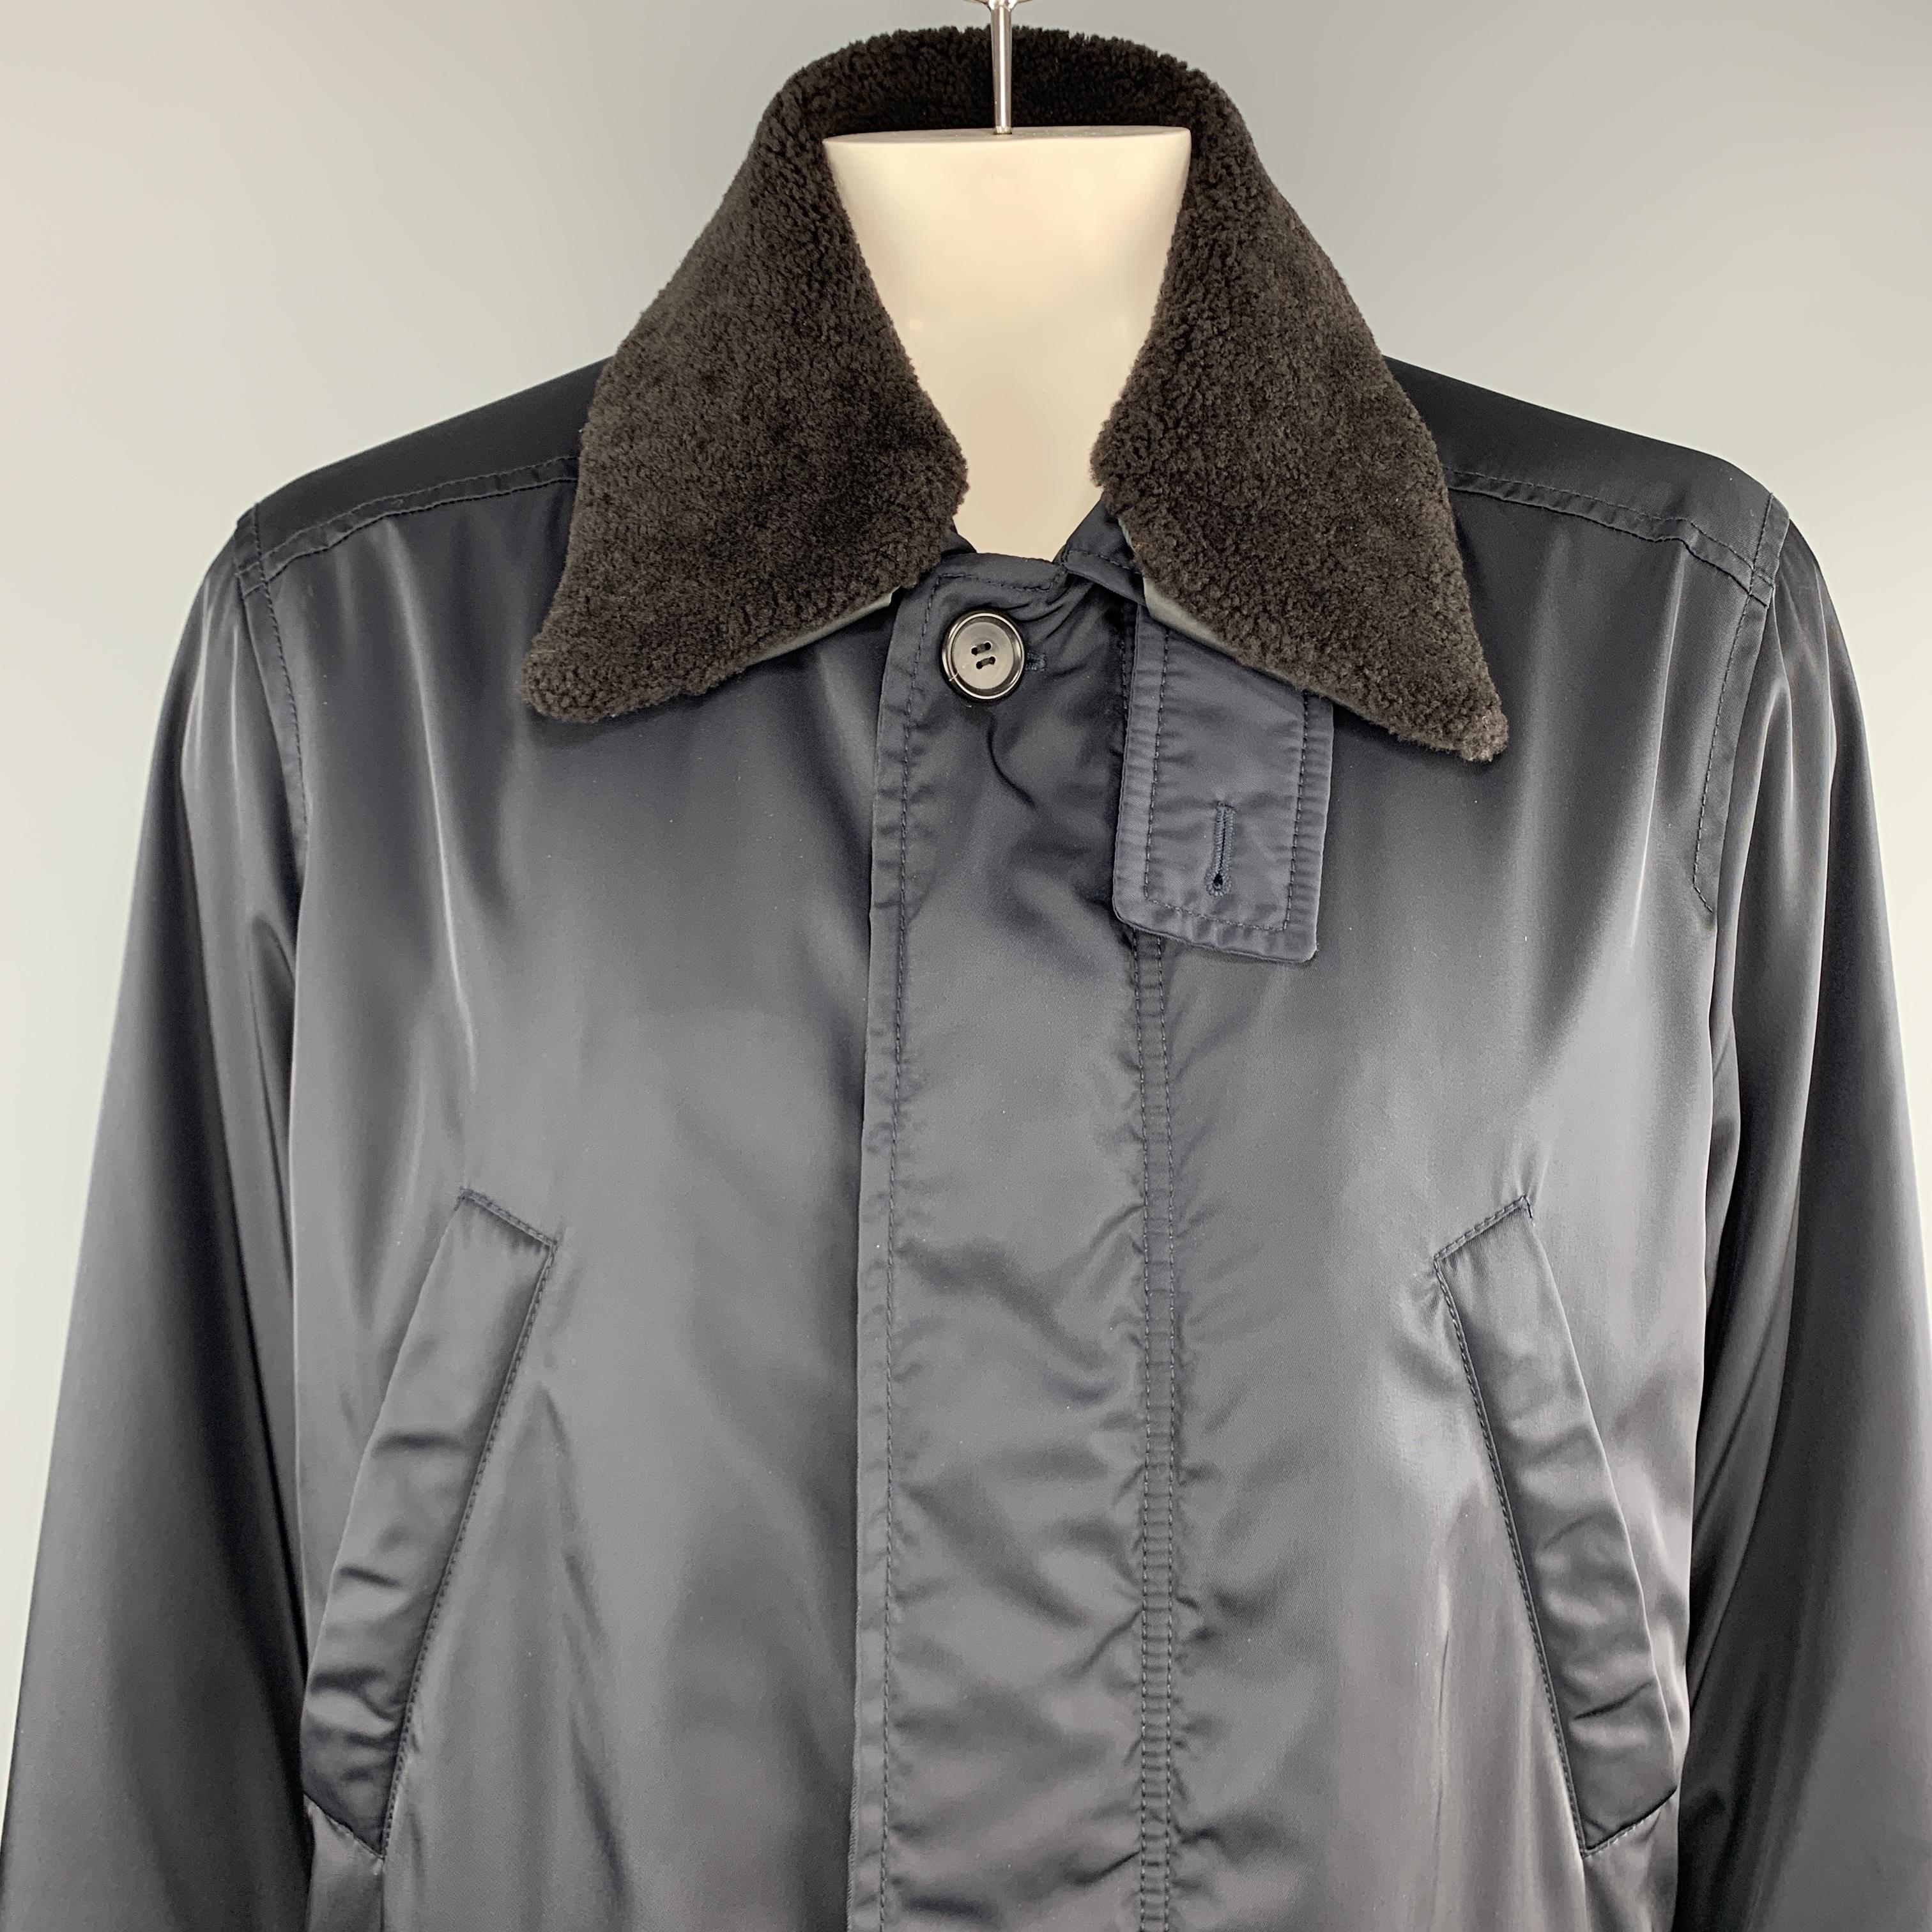 PRADA over coat comes in navy blue nylon twill with a zip and button hidden placket closure front, slanted zip and flap pockets, ribbed cuff sleeves, and detachable brown lamb shearling fur collar. Made in Italy.

Very Good Pre-Owned